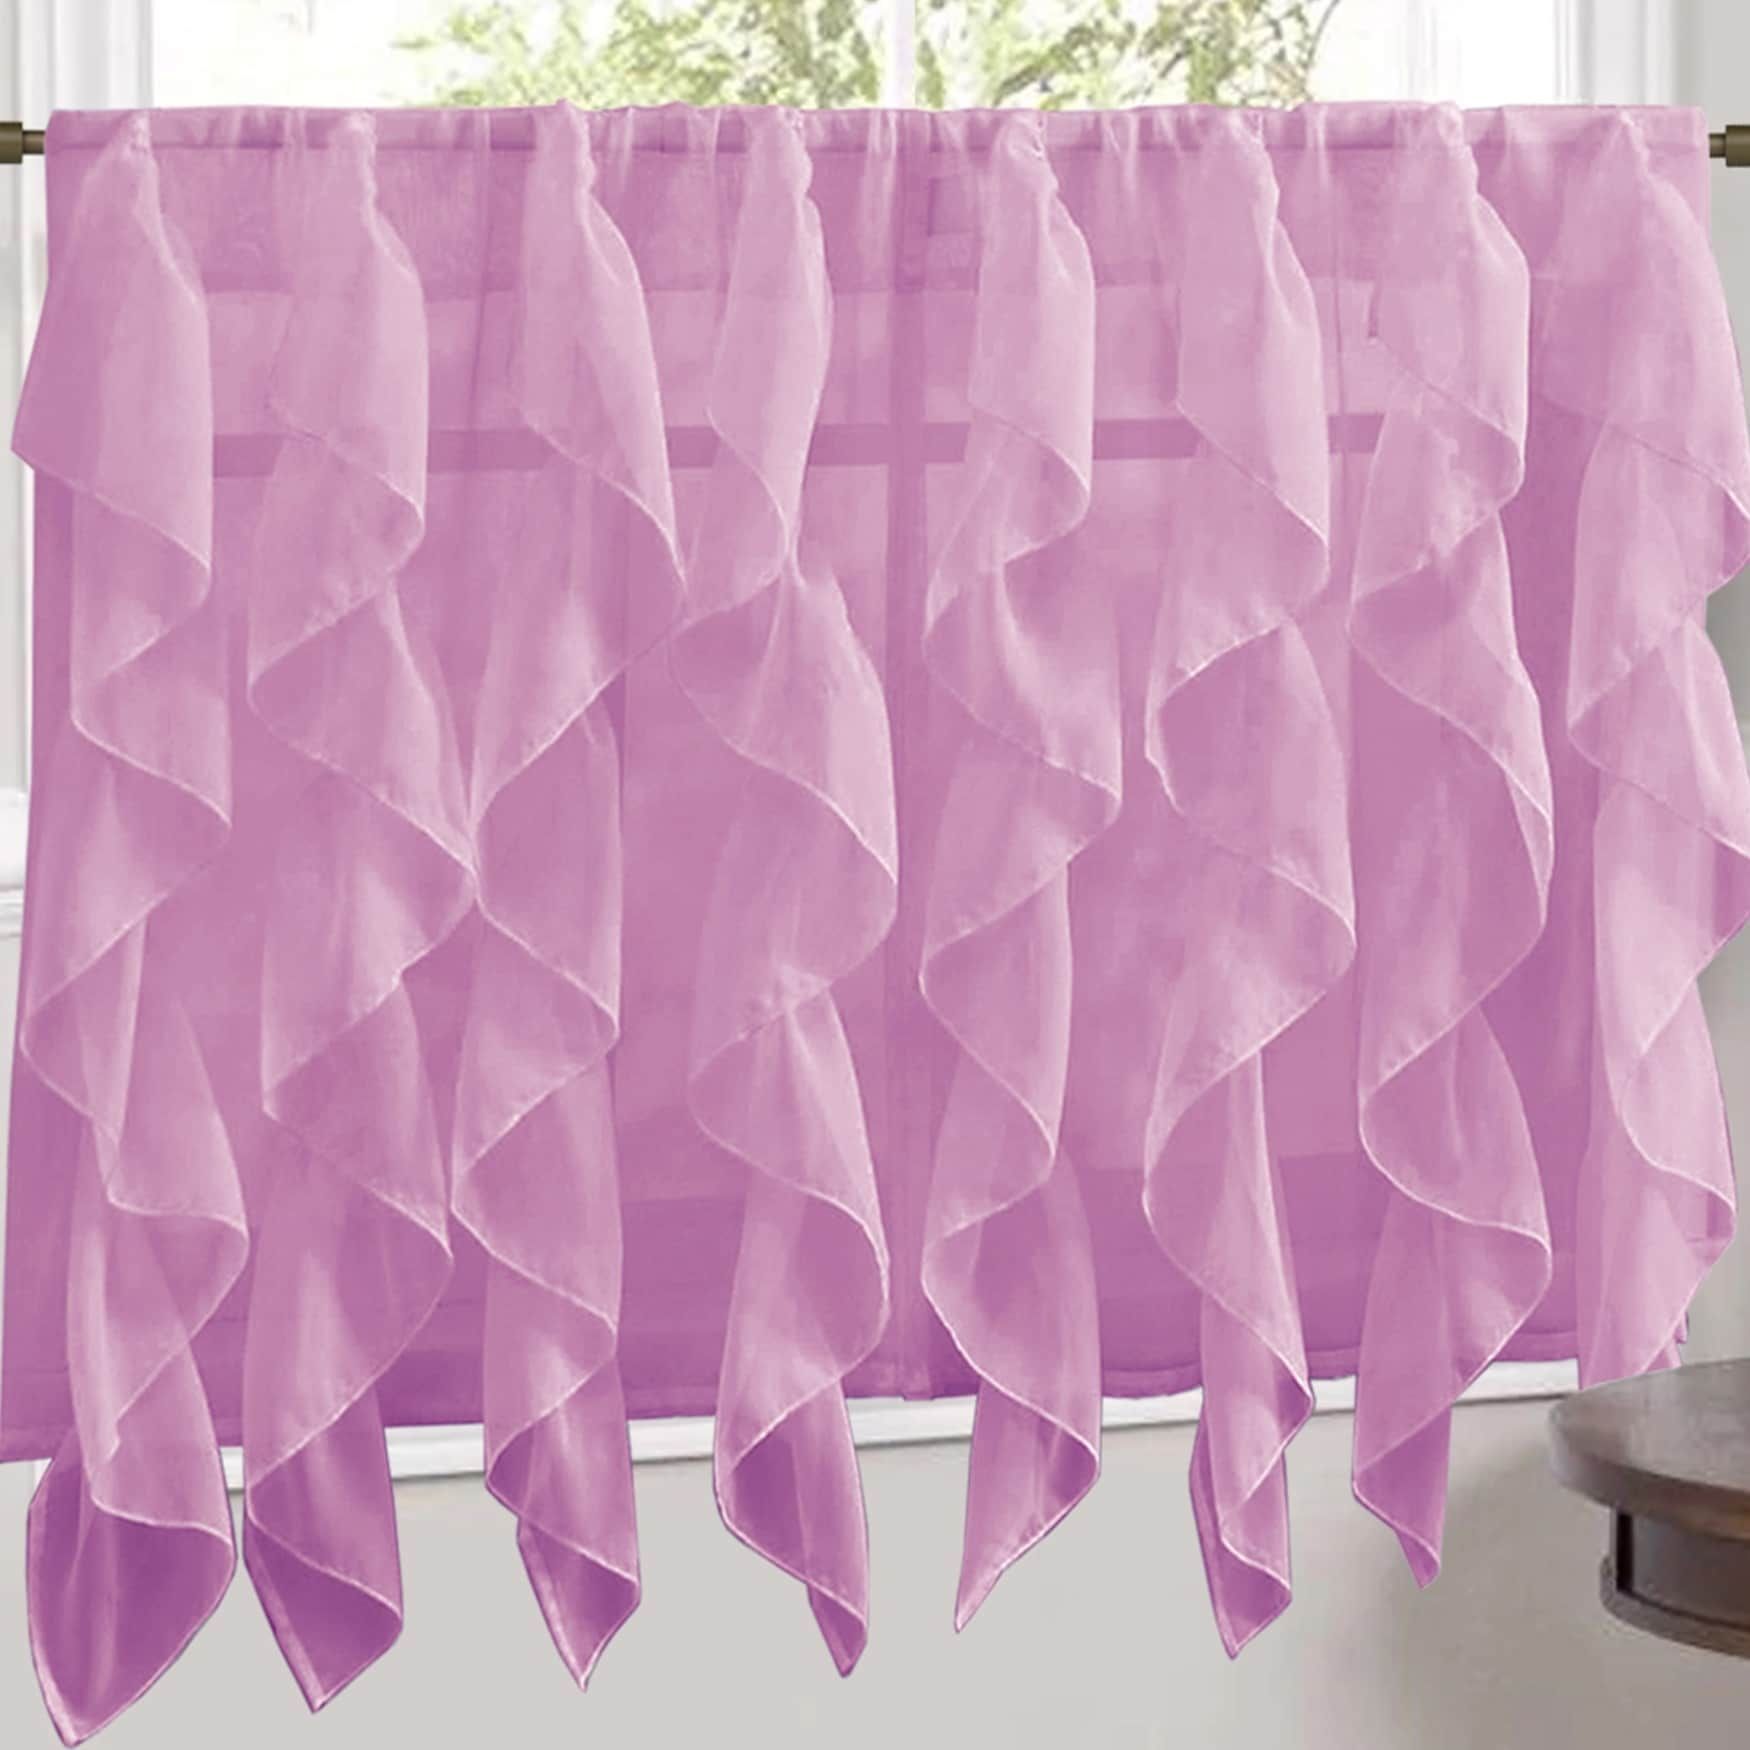 Sweet Home Collection Lavender Vertical Ruffled Waterfall Valance And  Curtain Tiers 24" Tier Pair With Regard To Vertical Ruffled Waterfall Valances And Curtain Tiers (View 8 of 20)